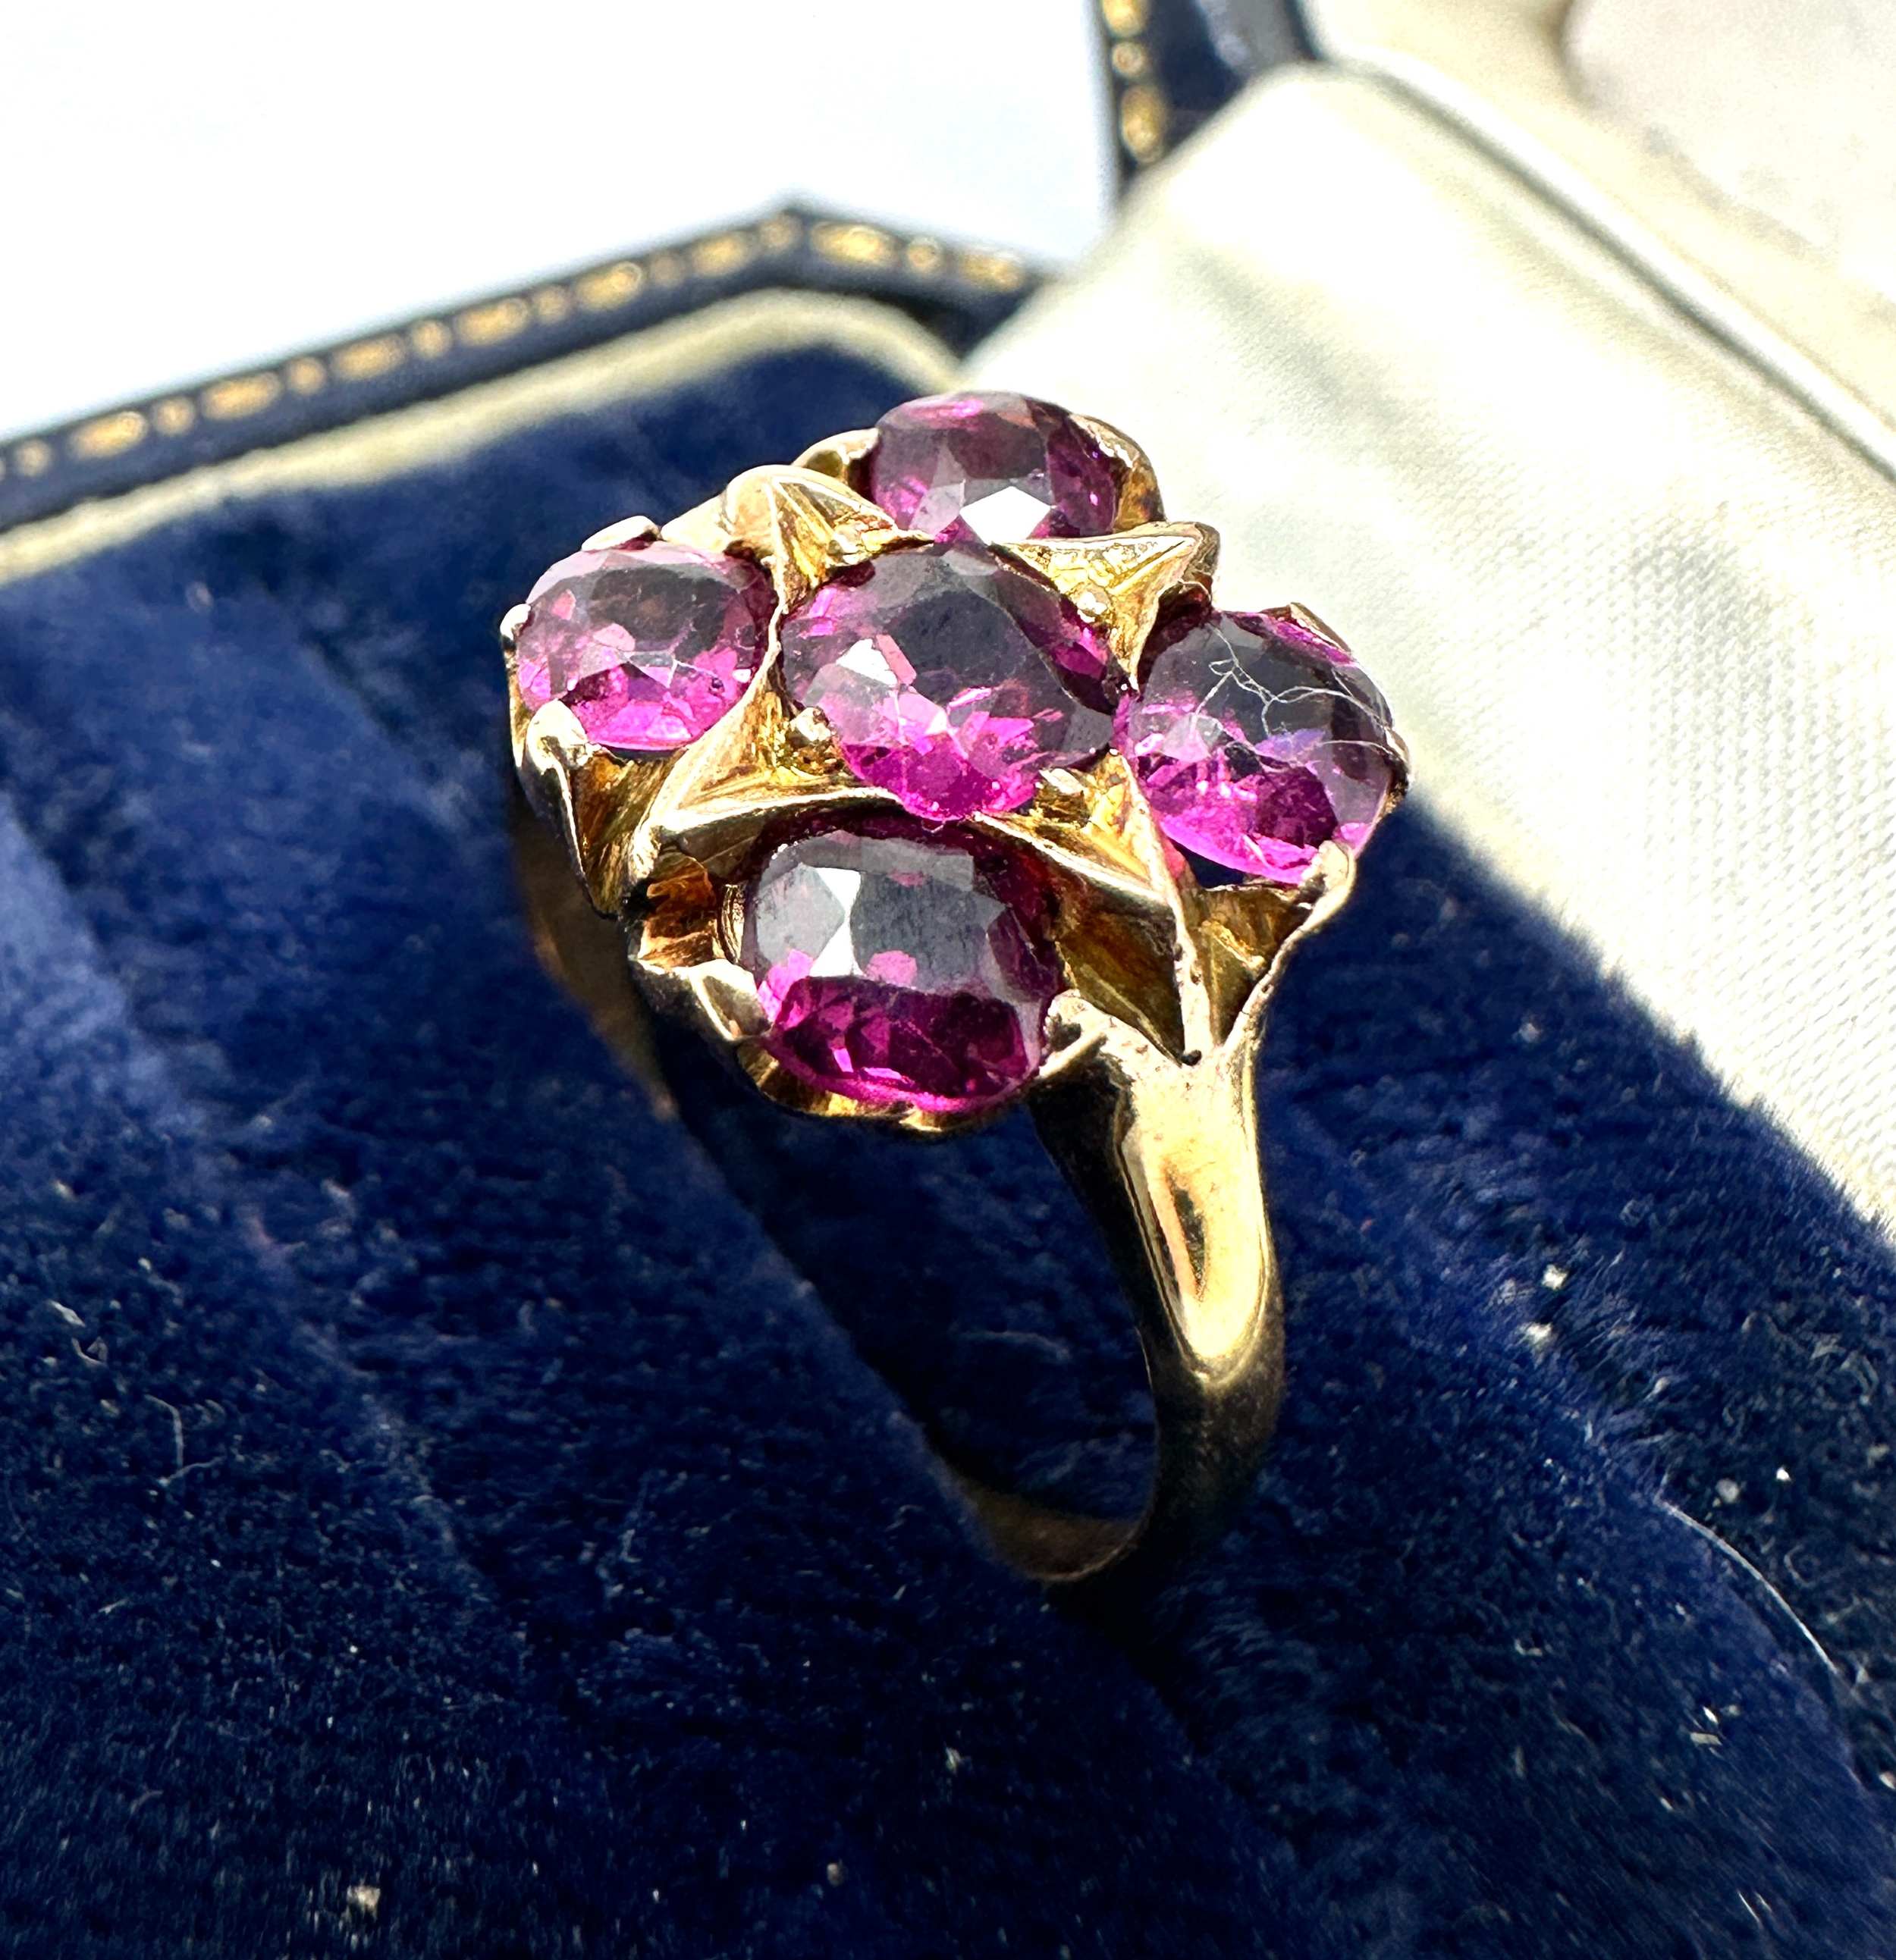 Antique 15ct gold amethyst ring weight 2.7 tested as 14 / 15ct gold - Image 3 of 4